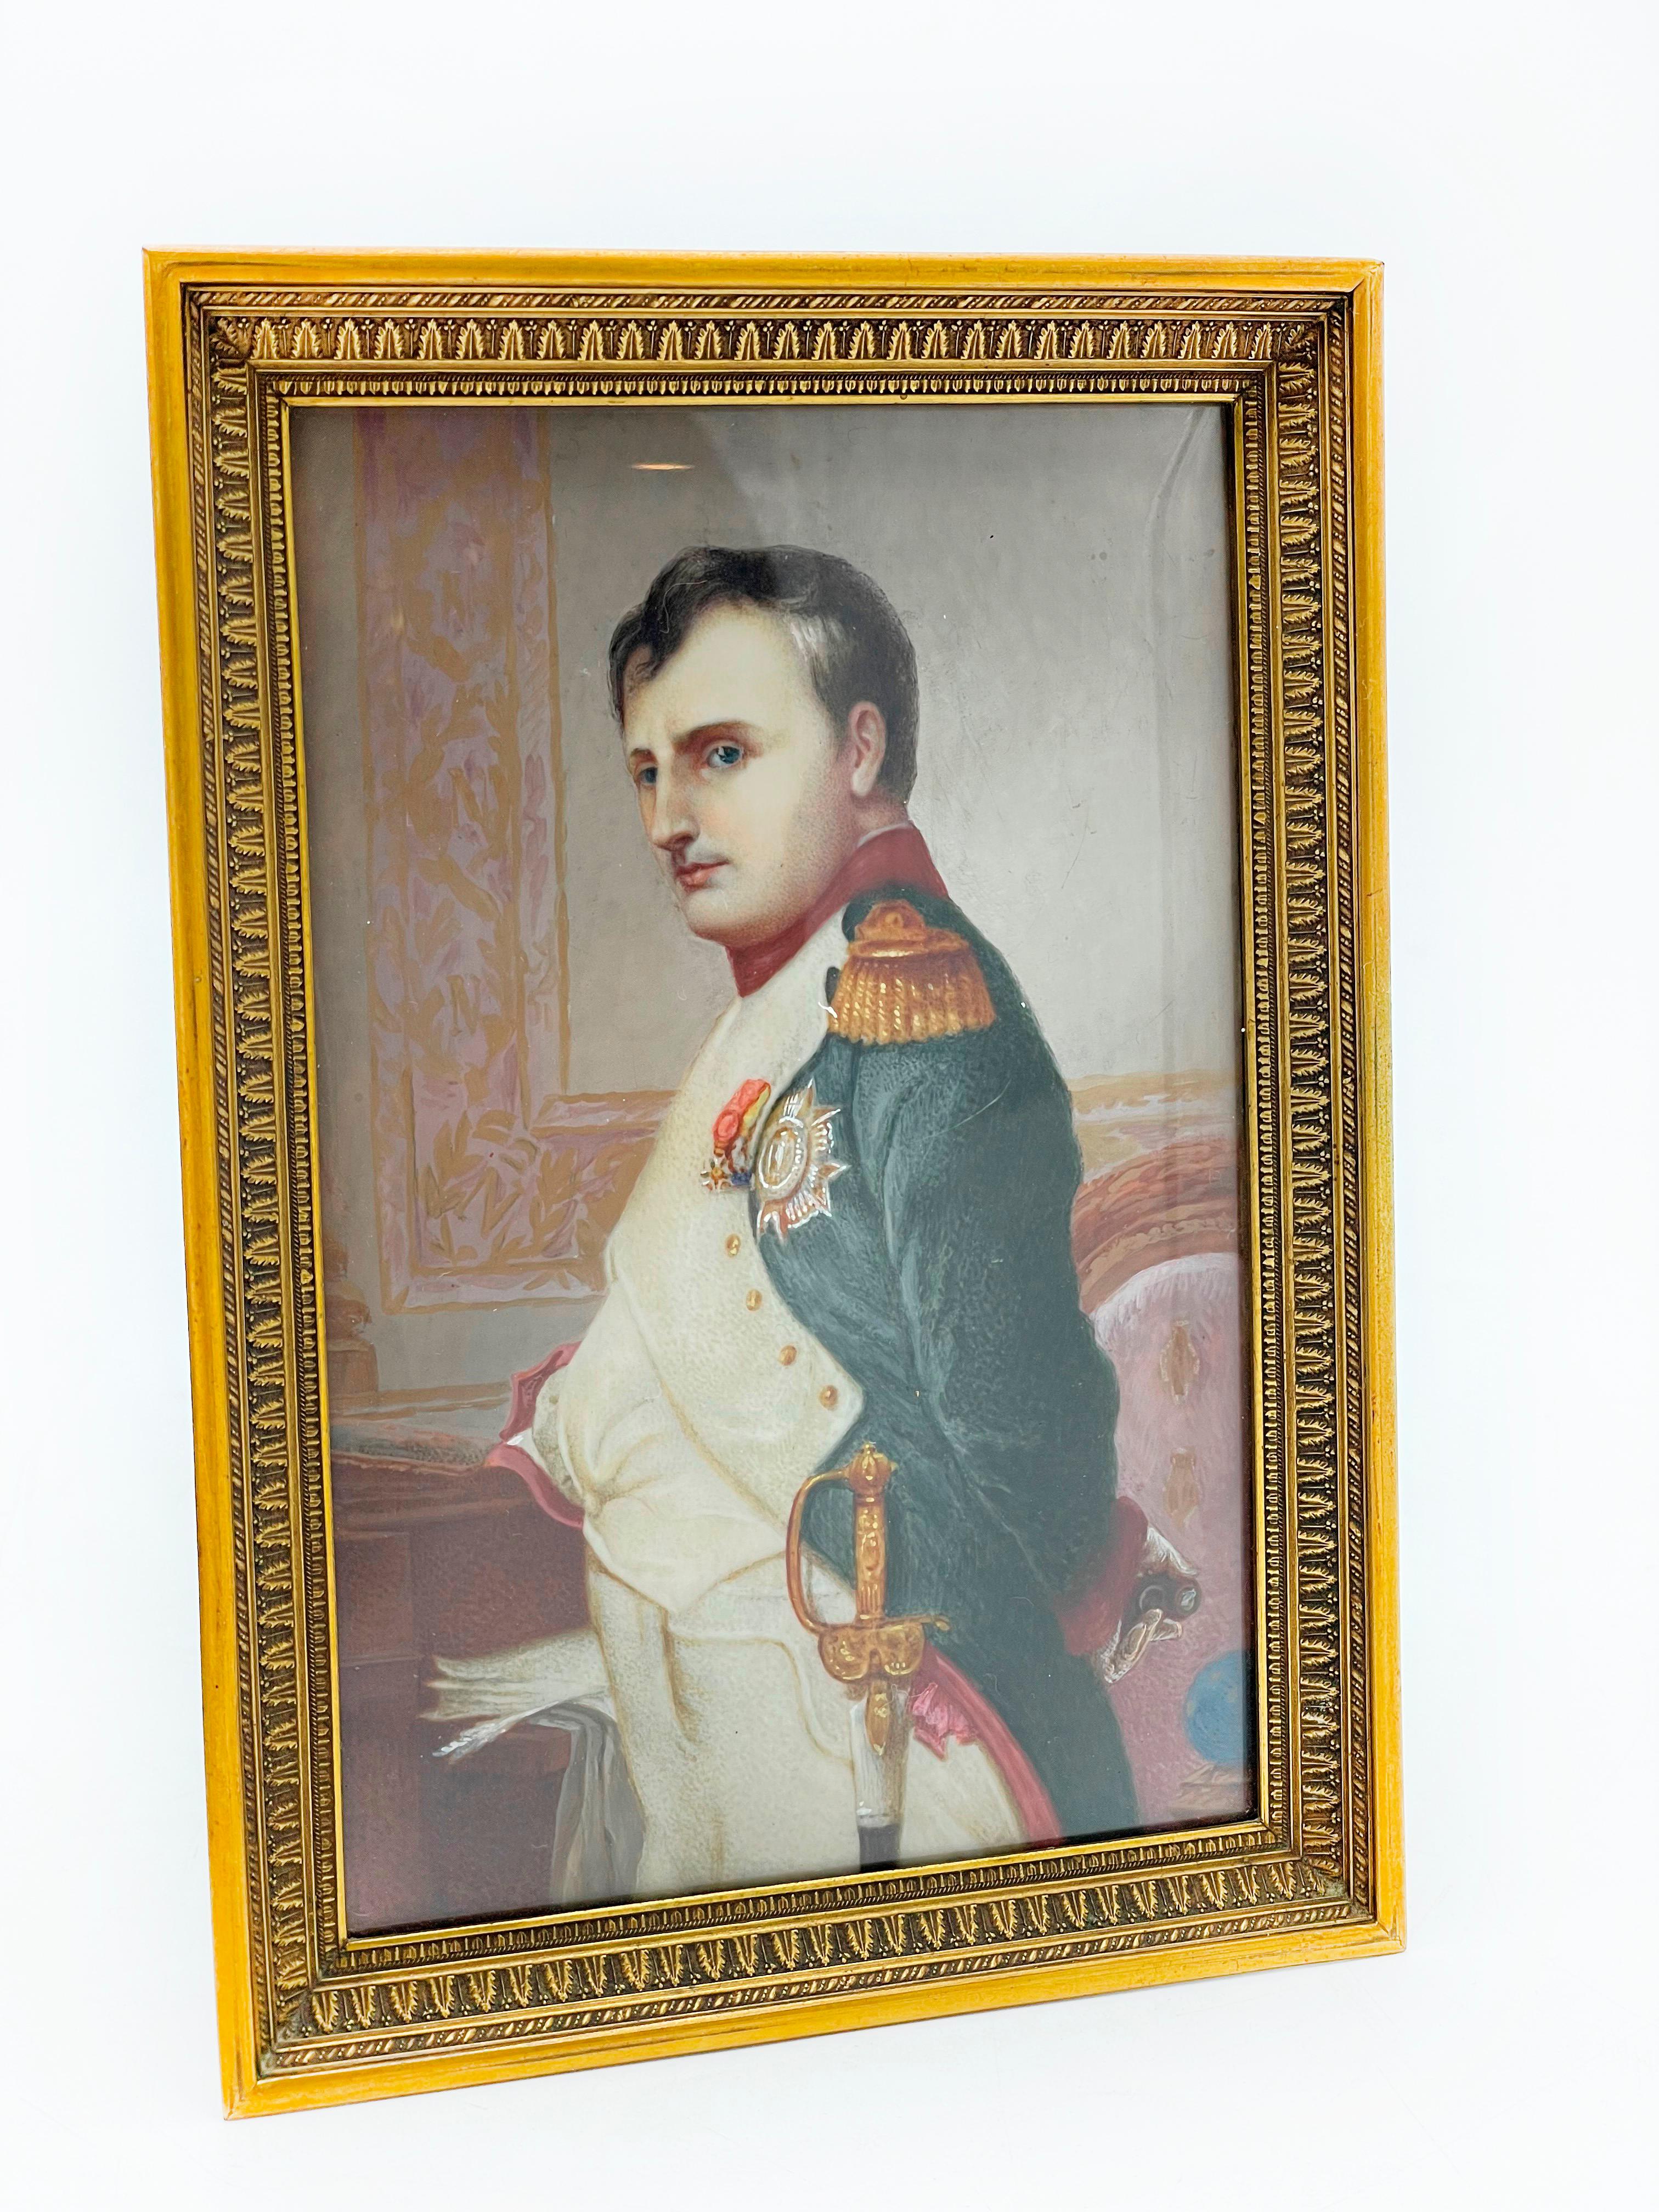 Antique Oil Painting French Portrait Miniature: Napoleon Bonaparte, Full Military Dress
France, Mid-19th Century

Measures:
13 centimeters high
9 centimeters width

Neoclassical Style / Wood and Hand-Painted

This magnificent miniature is a true